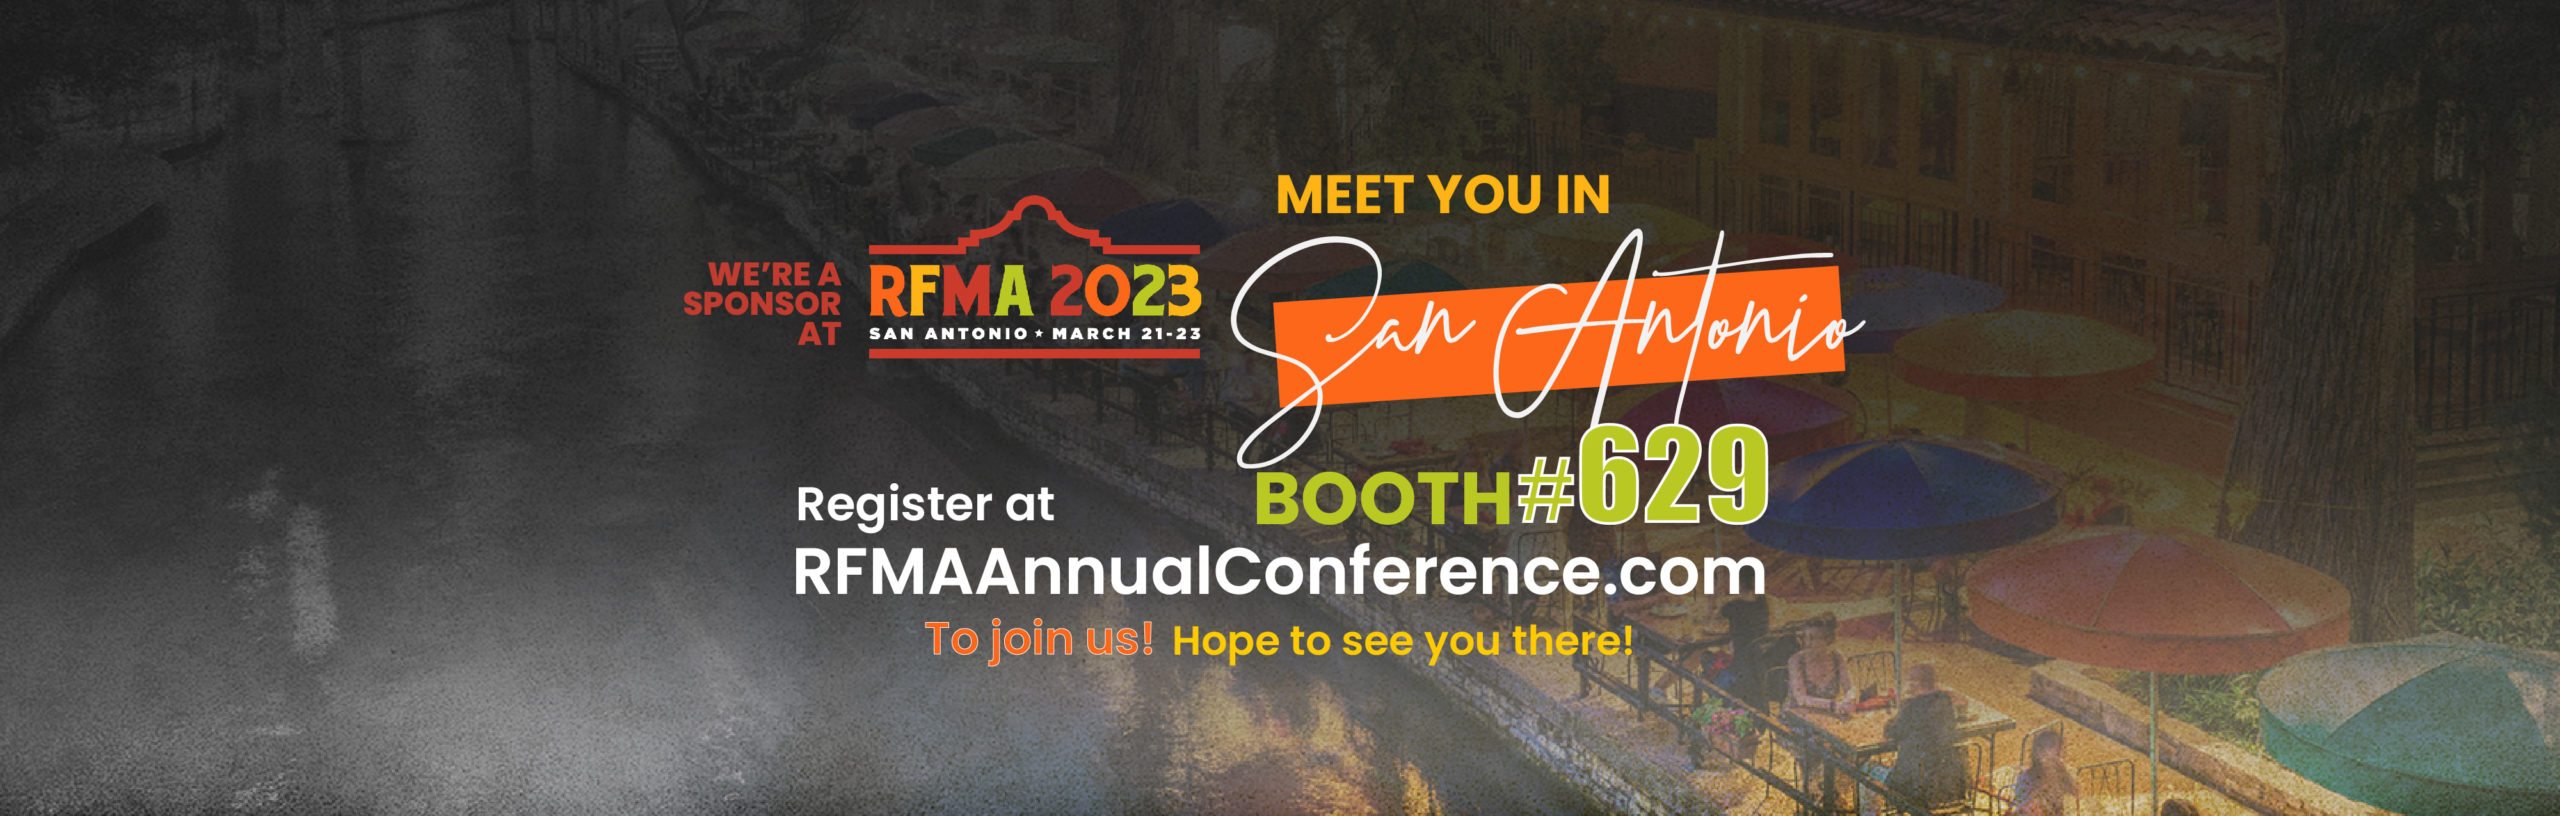 Banner inviting to RFMA 2023 in San Antonio Booth 629